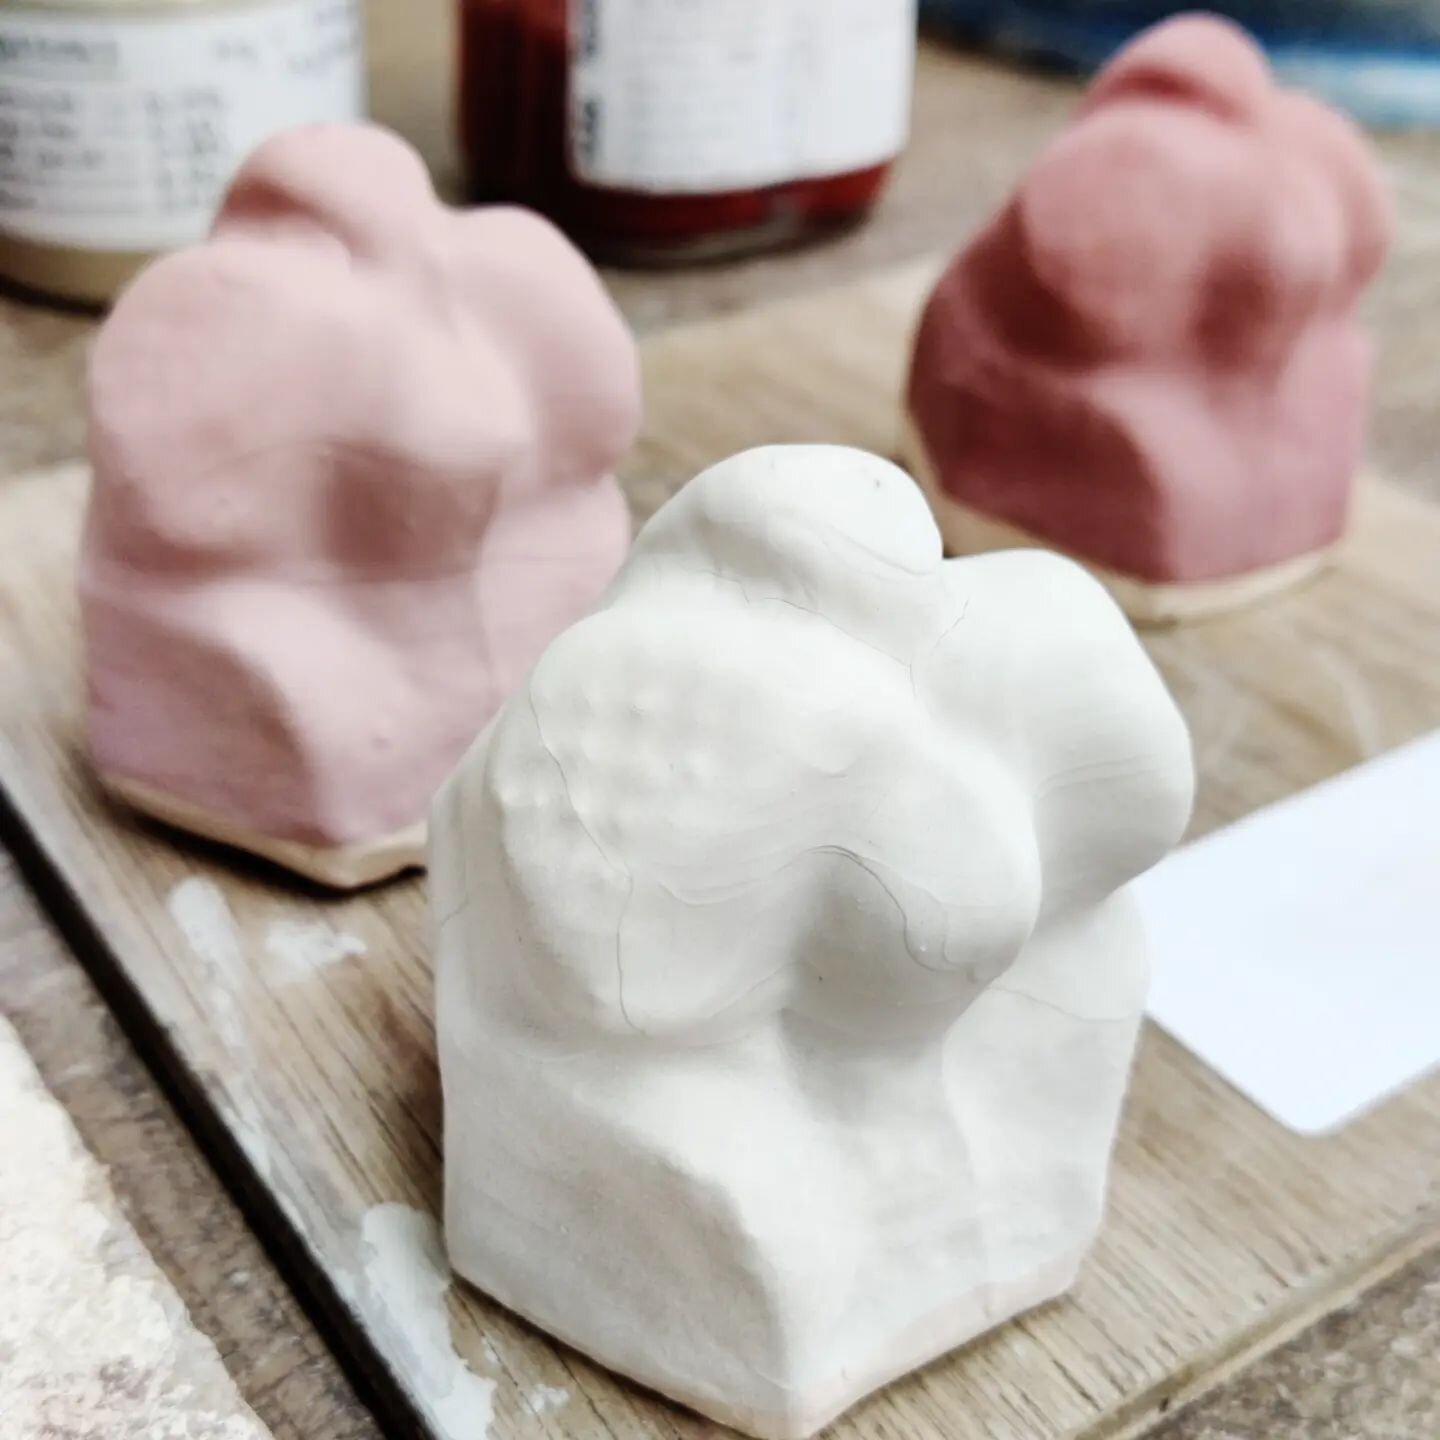 Some snoots dipped and ready to test glaze! 

Need to finish a lot more before they go to fire though but this is a start ☺️

#ceramics #ceramicstudio #ceramicsculptures #ceramicsglaze #ceramicsglazing #ceramicsglazes #testtiles #uclanceramics #uclan